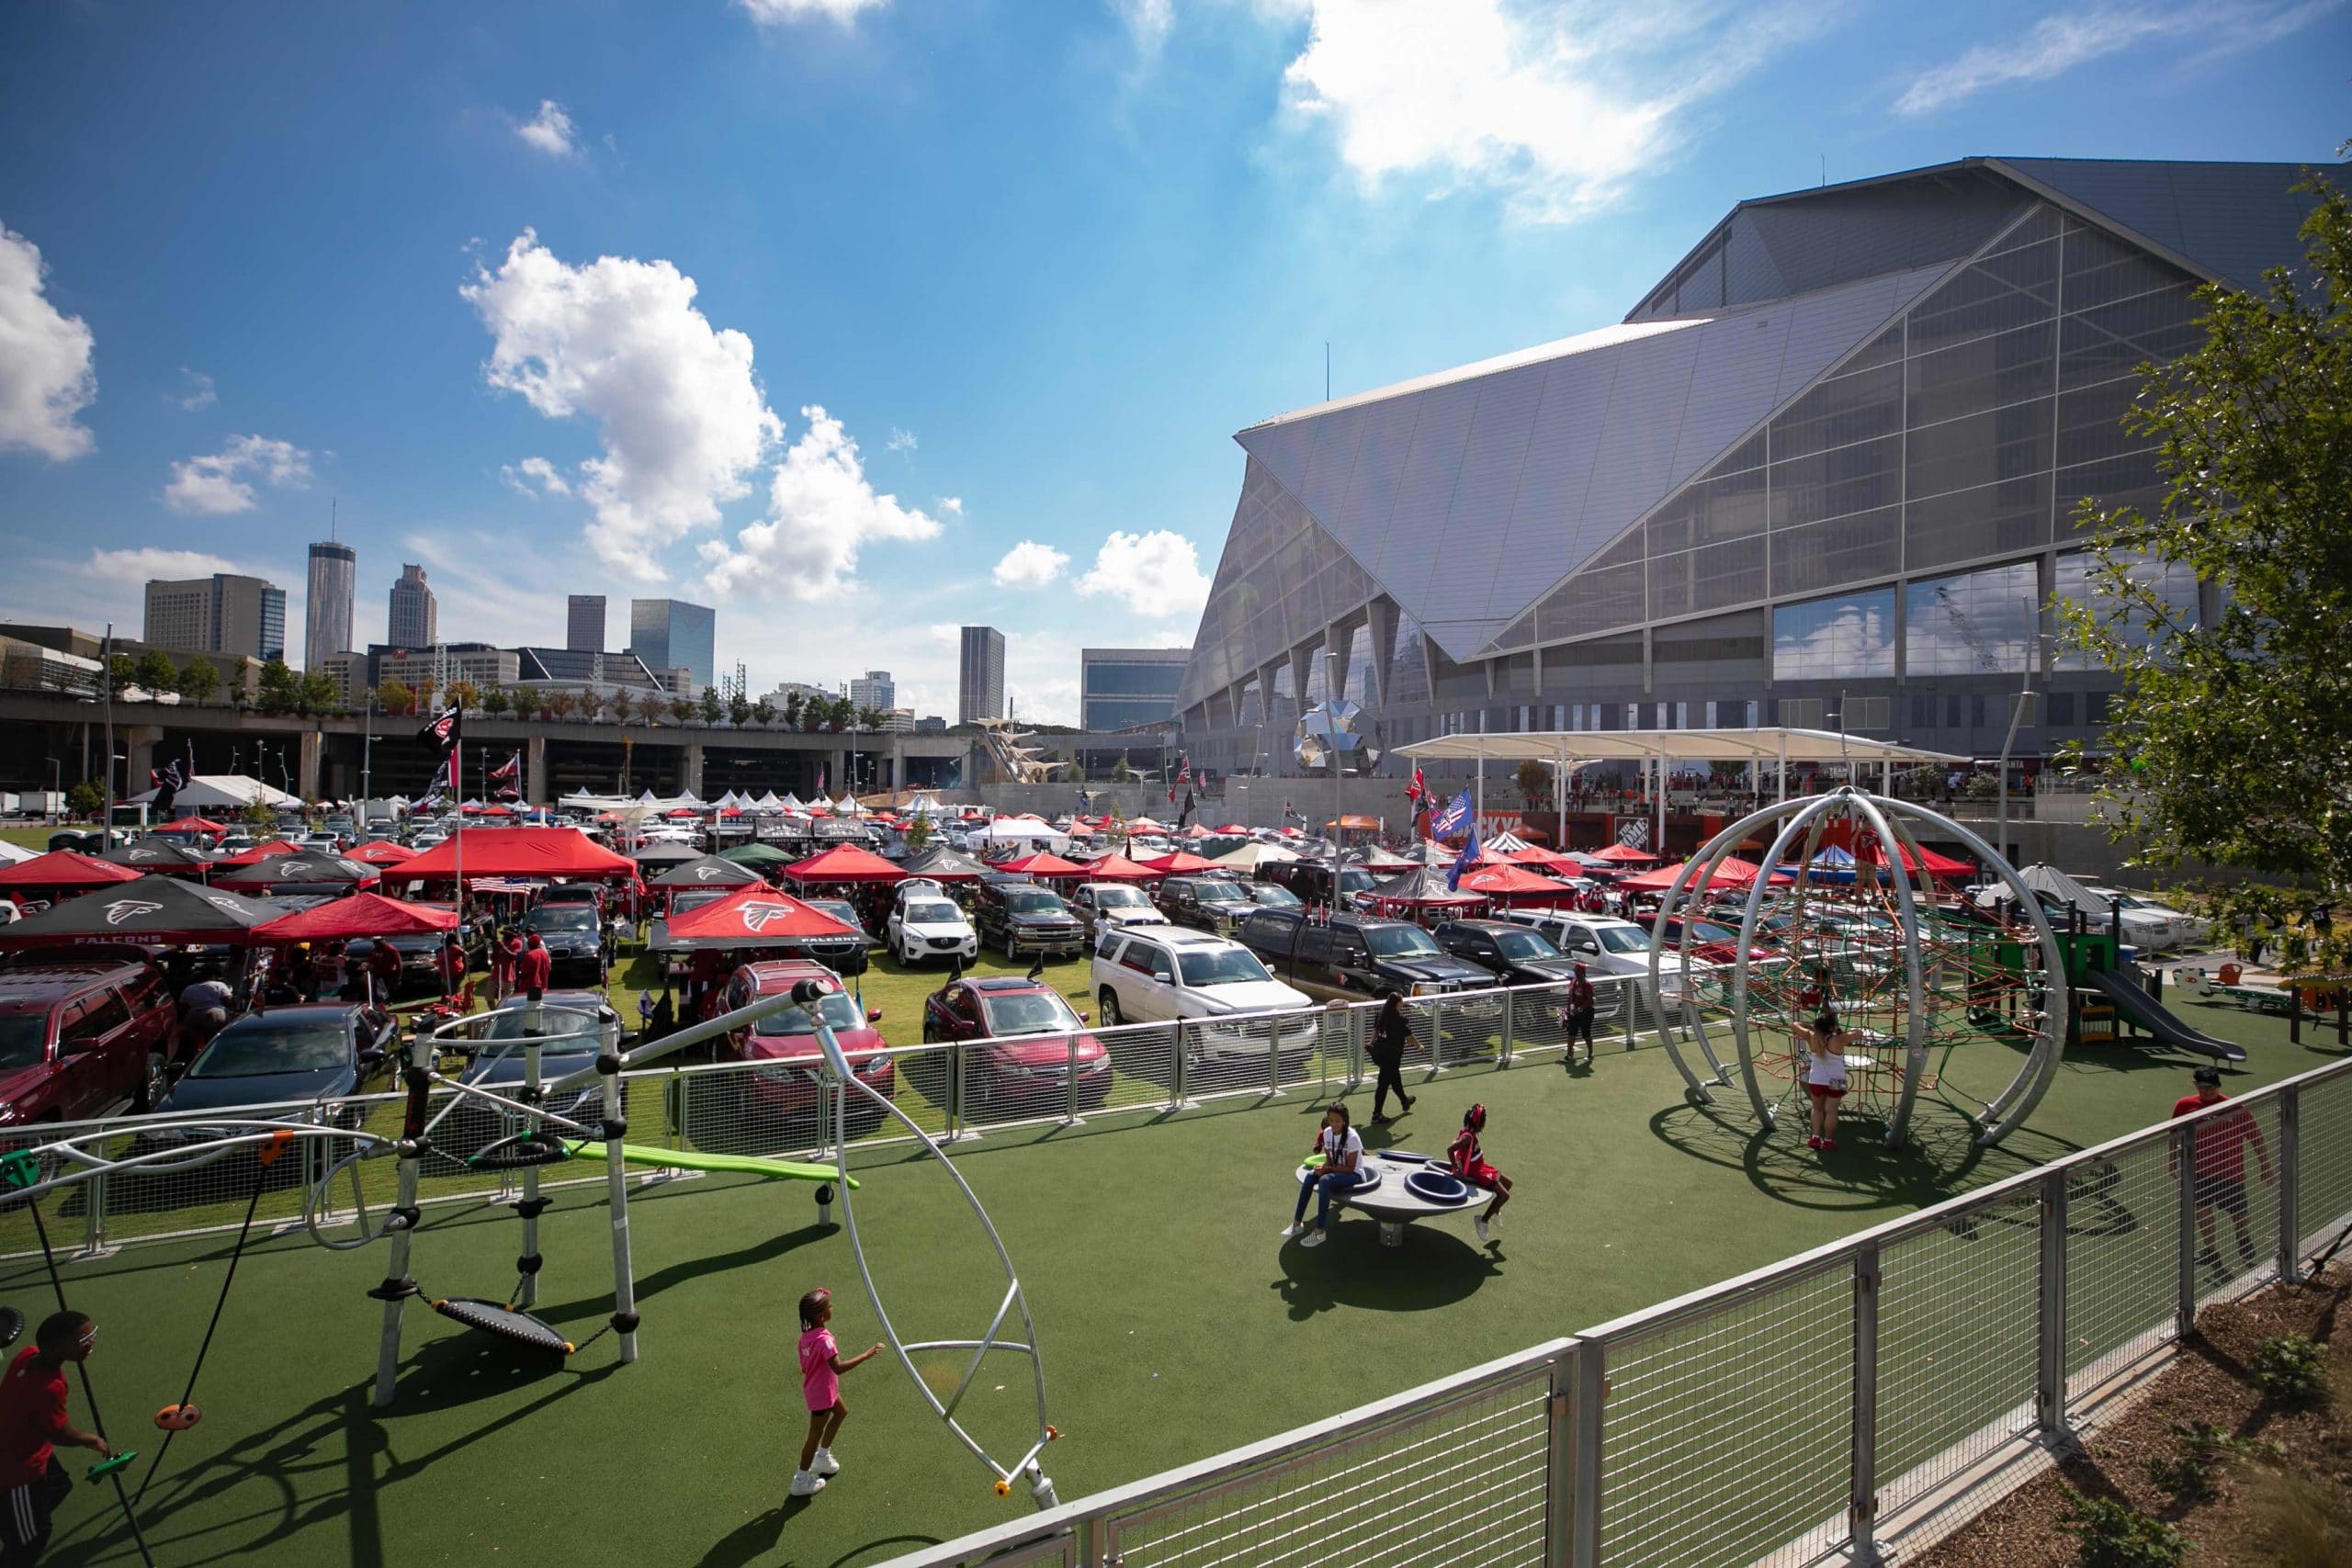 Home Depot Backyard Fabric Structures to Shelter Super Bowl Attendees